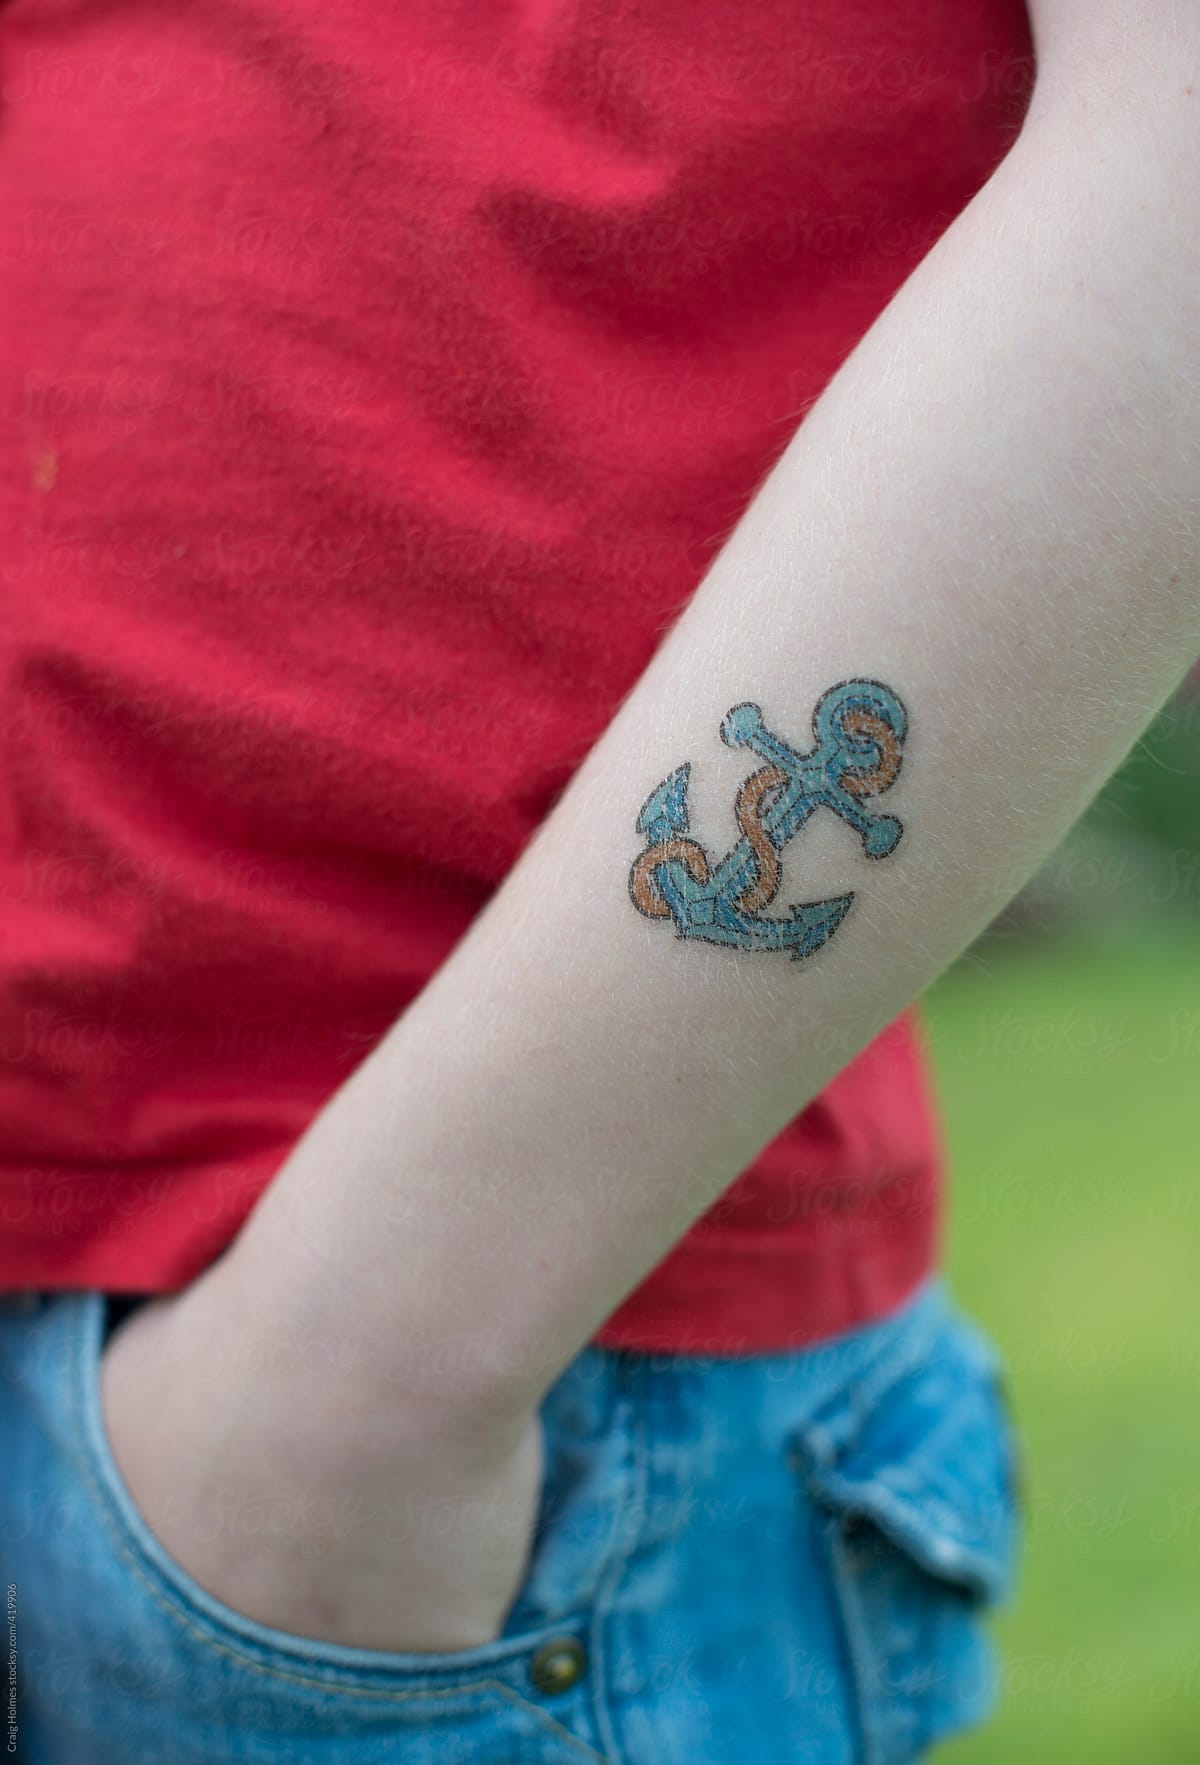 A boy with a temporary tattoo on his arm in the shape of an anchor.